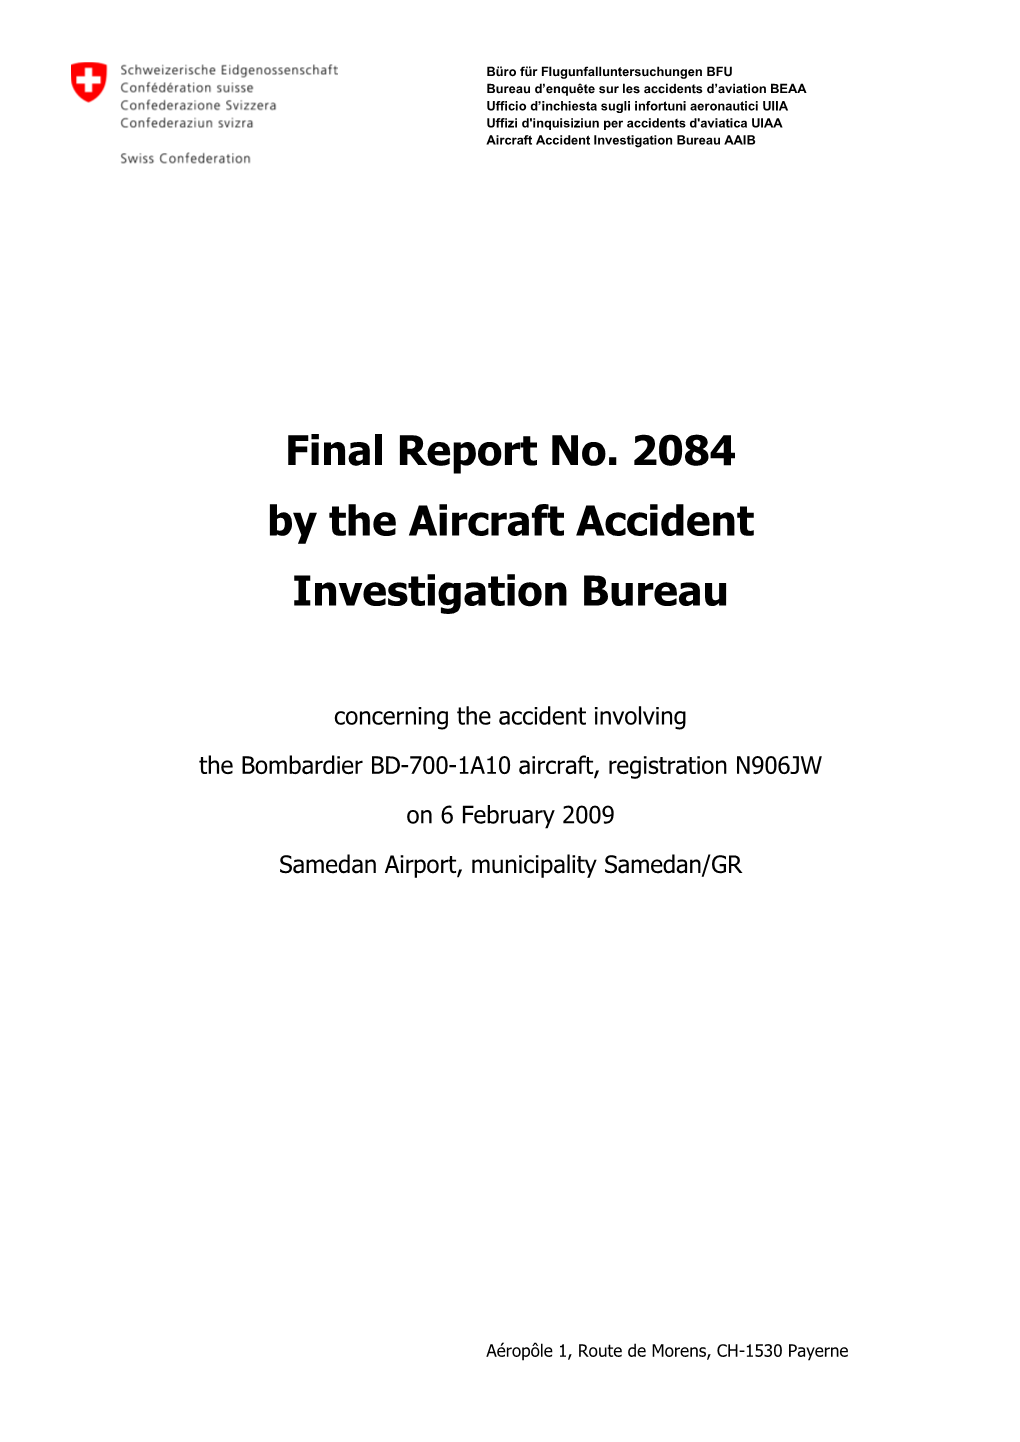 Final Report No. 2084 by the Aircraft Accident Investigation Bureau